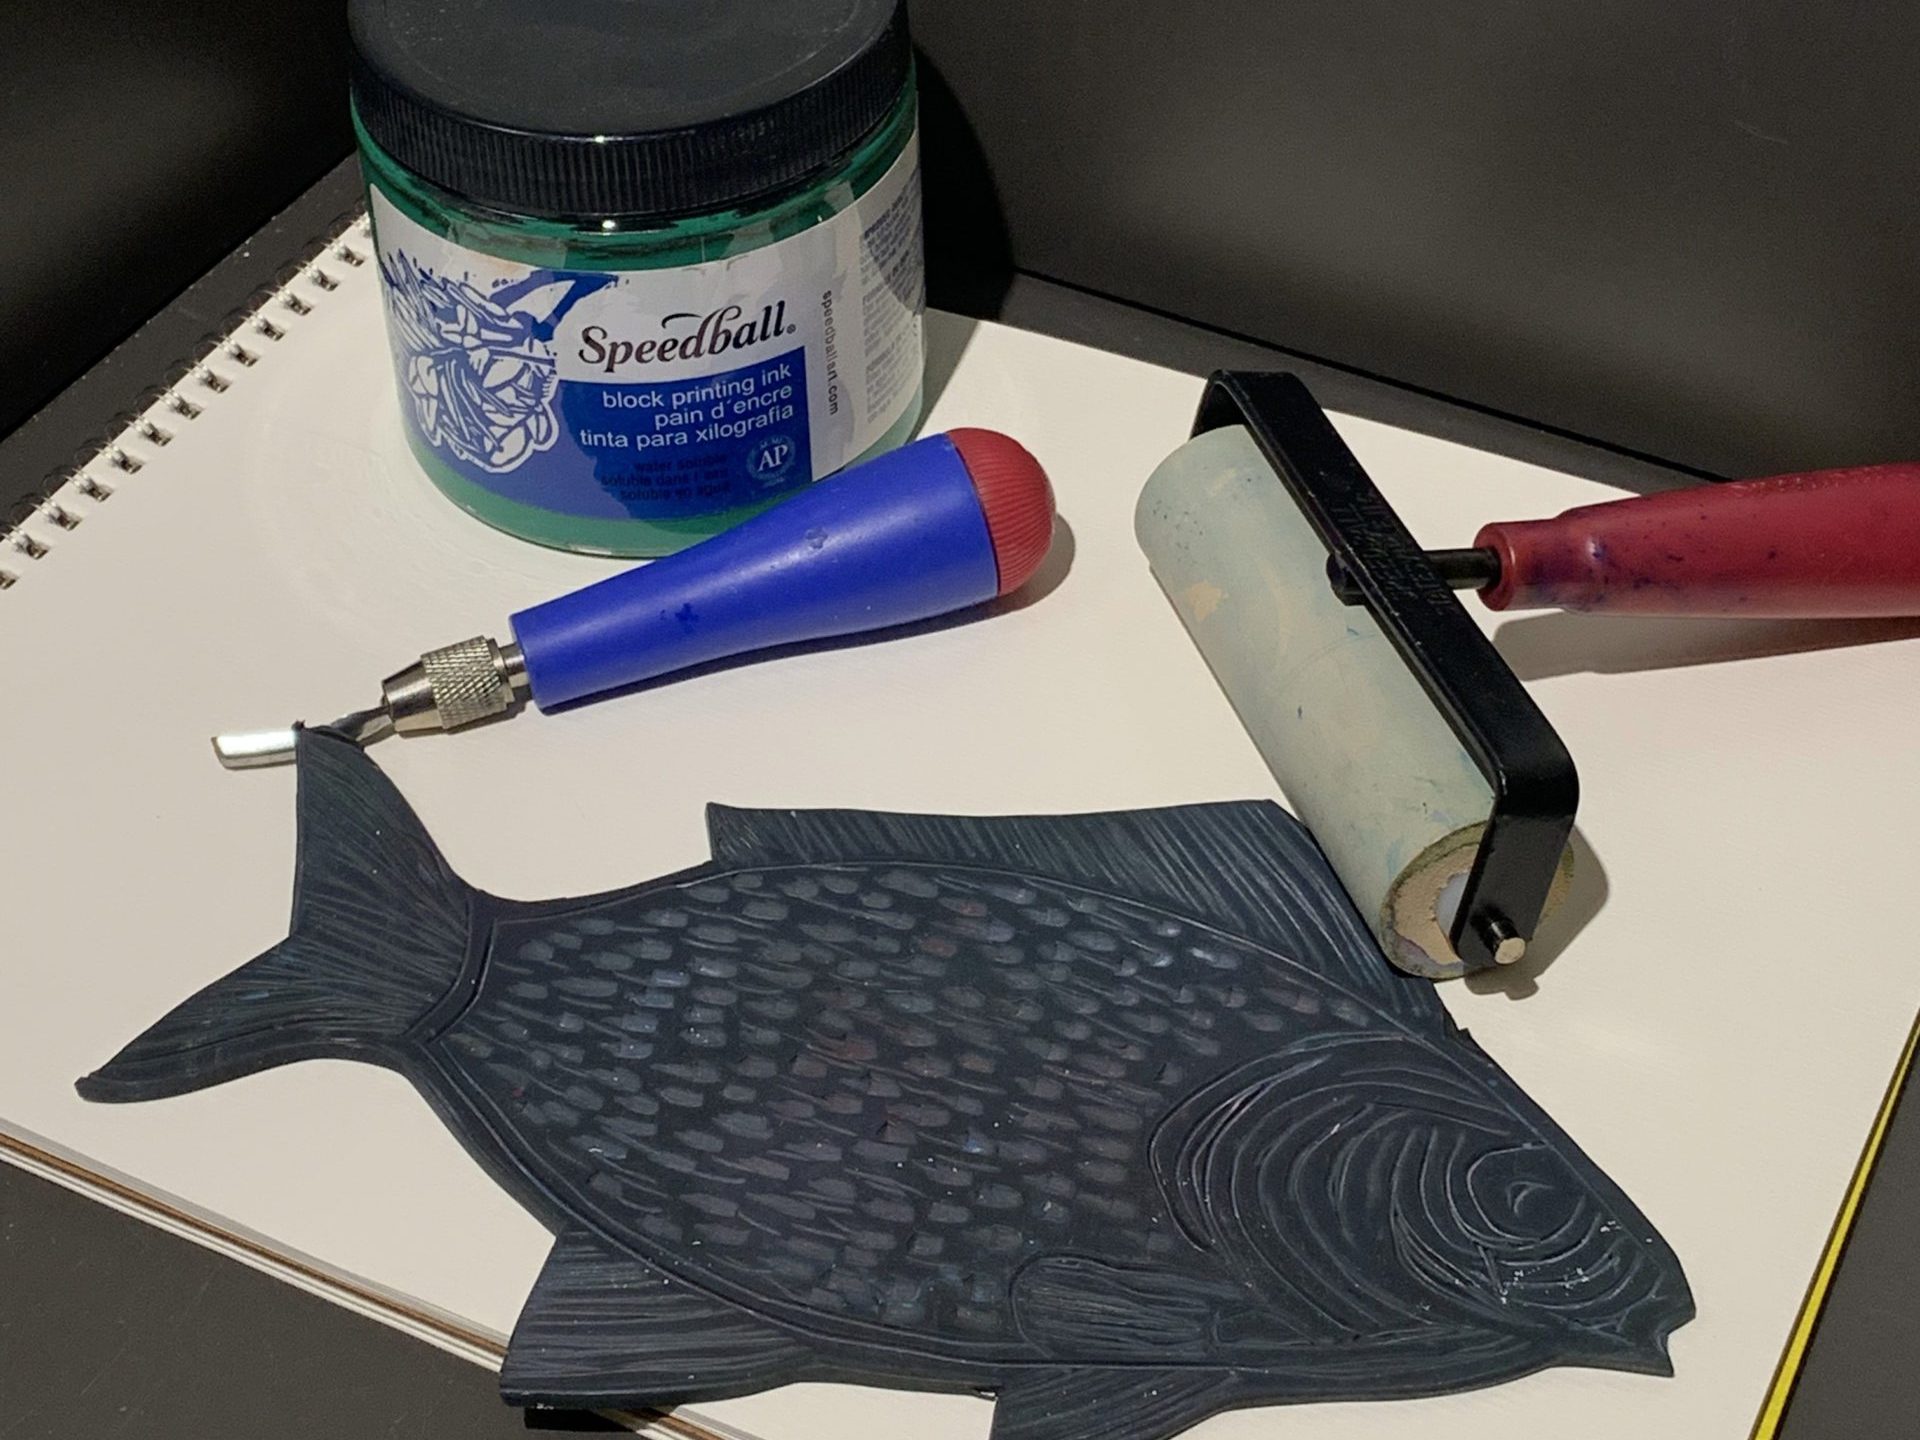 A tableau of printmaking items, including paper, a brayer, ink, a cutting tool, and a piece of linoleum carved to look like a fish.